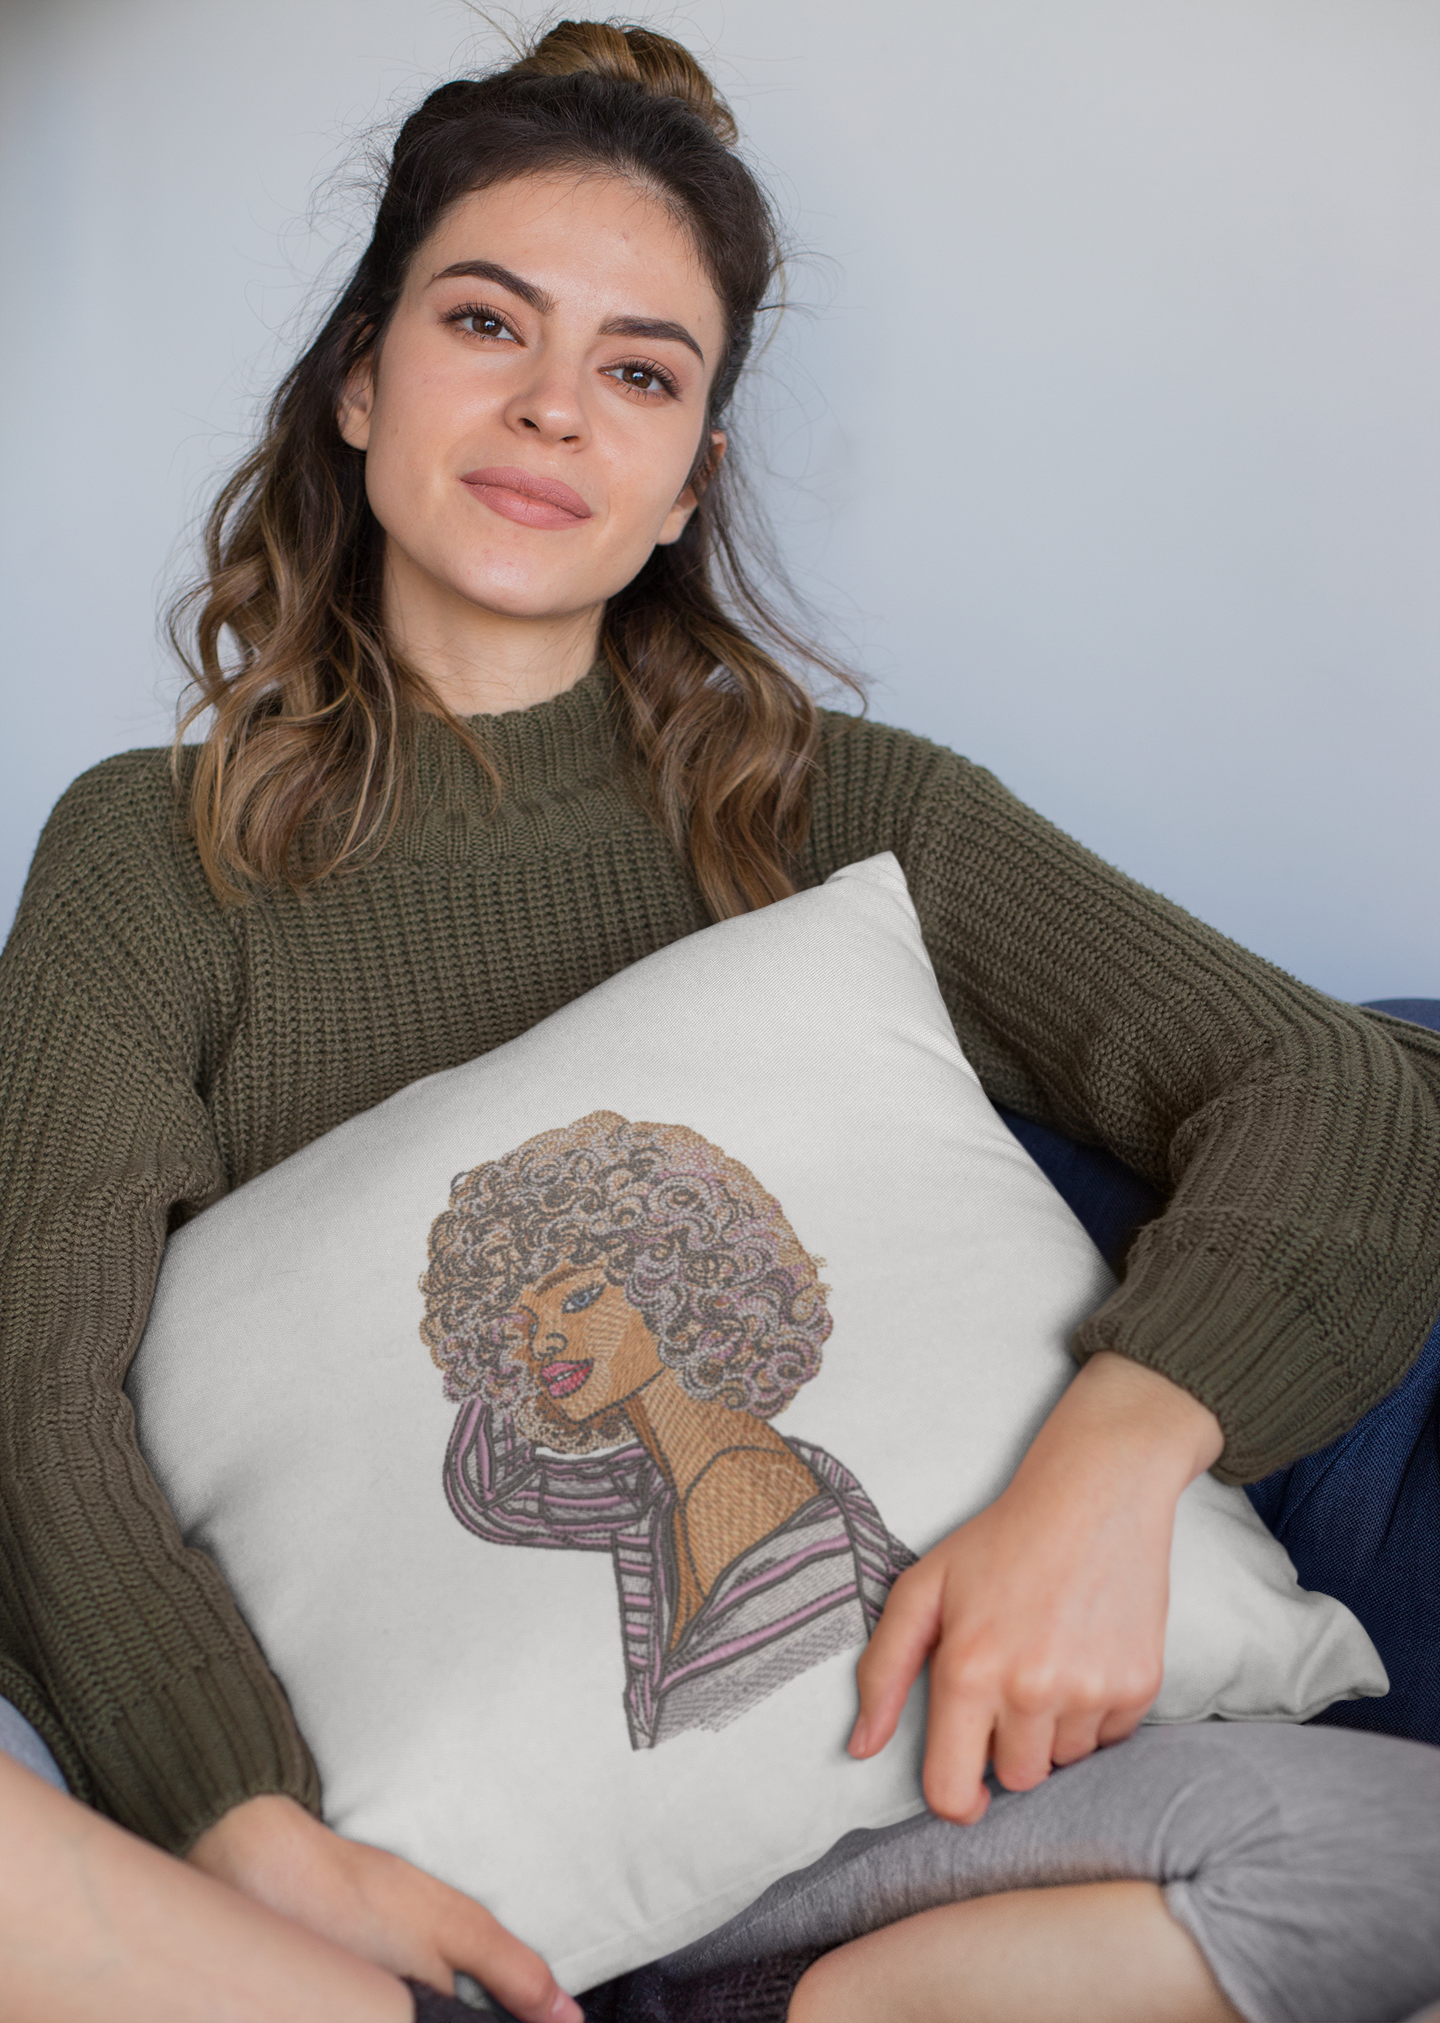 Embroidered home pillow with Woman portrait design